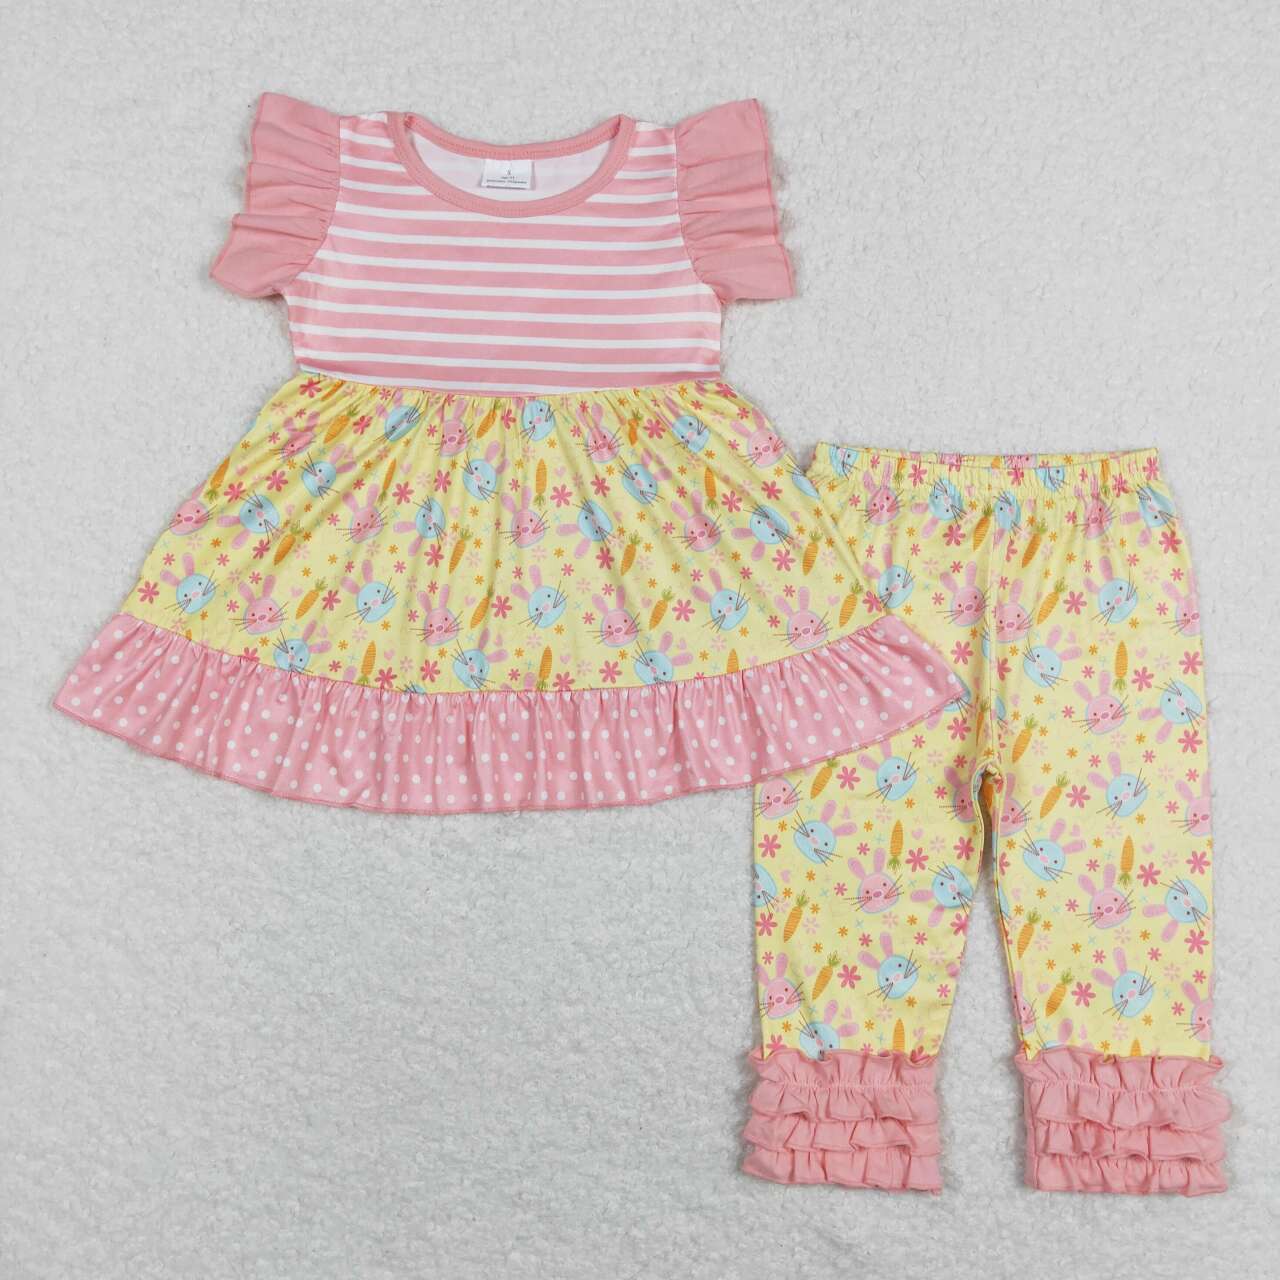 A15-23 toddler girl clothes floral bunny rabbit baby spring clothing set girl easter outfit